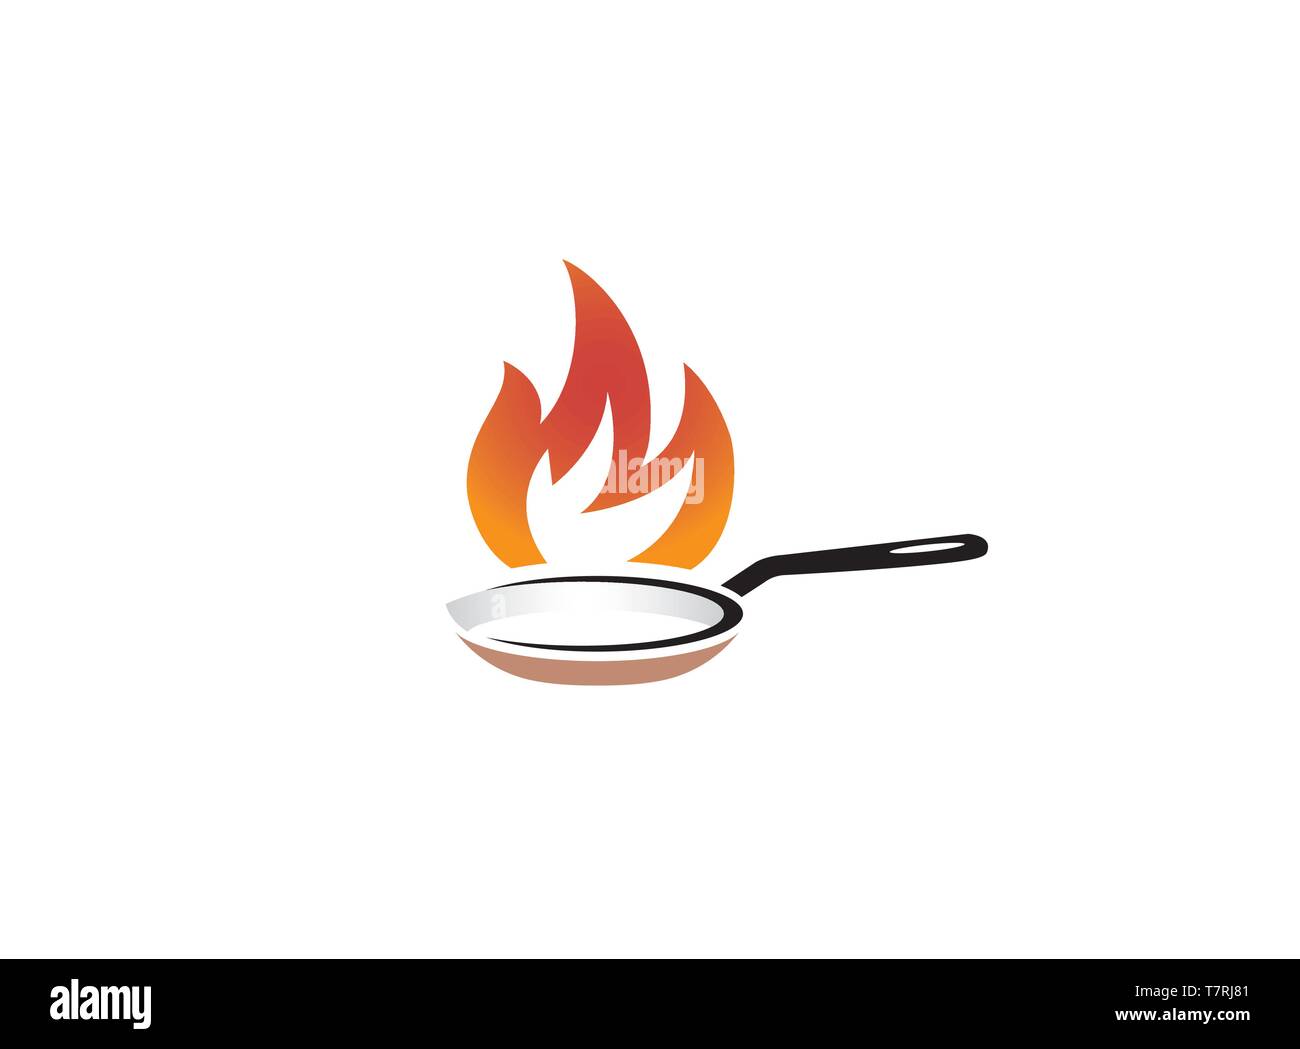 Fire in a pan cooking food logo design illustration on white background Stock Vector